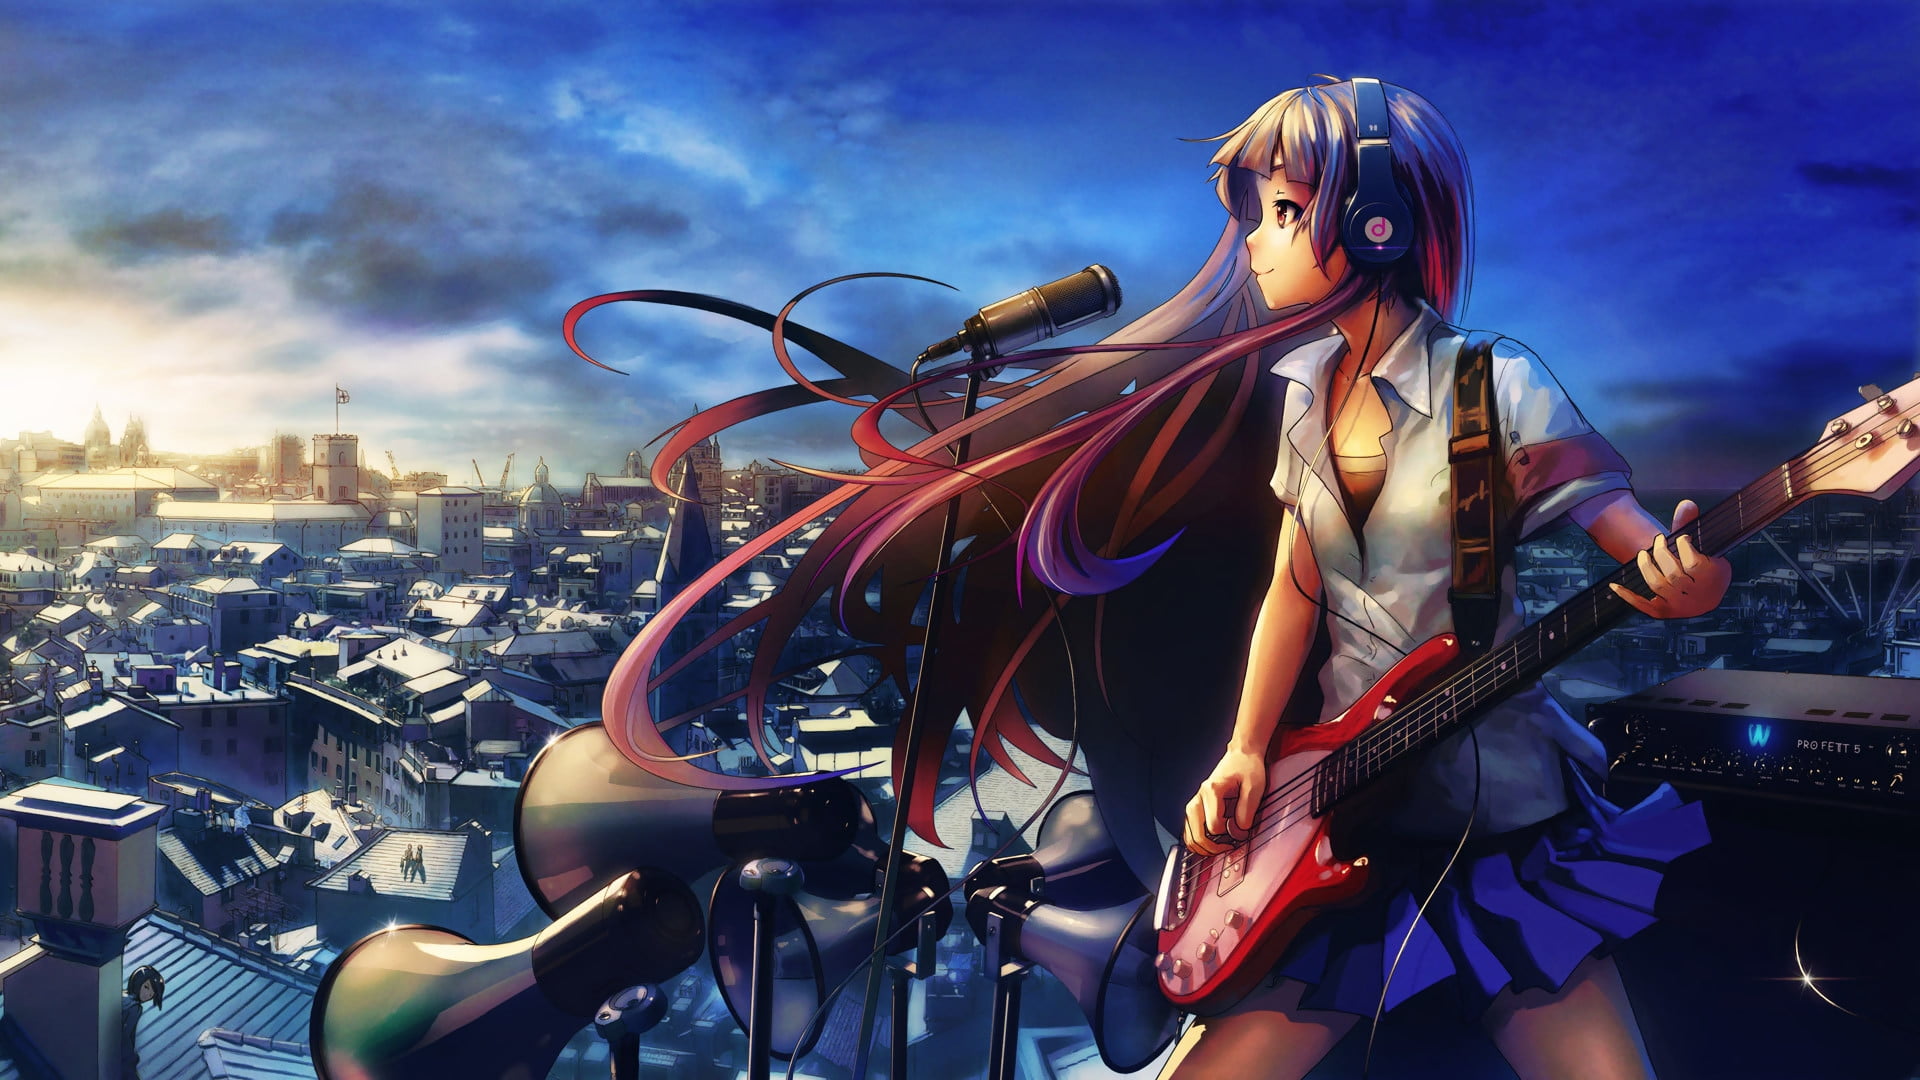 Anime Girl Electric Guitar by istase on DeviantArt